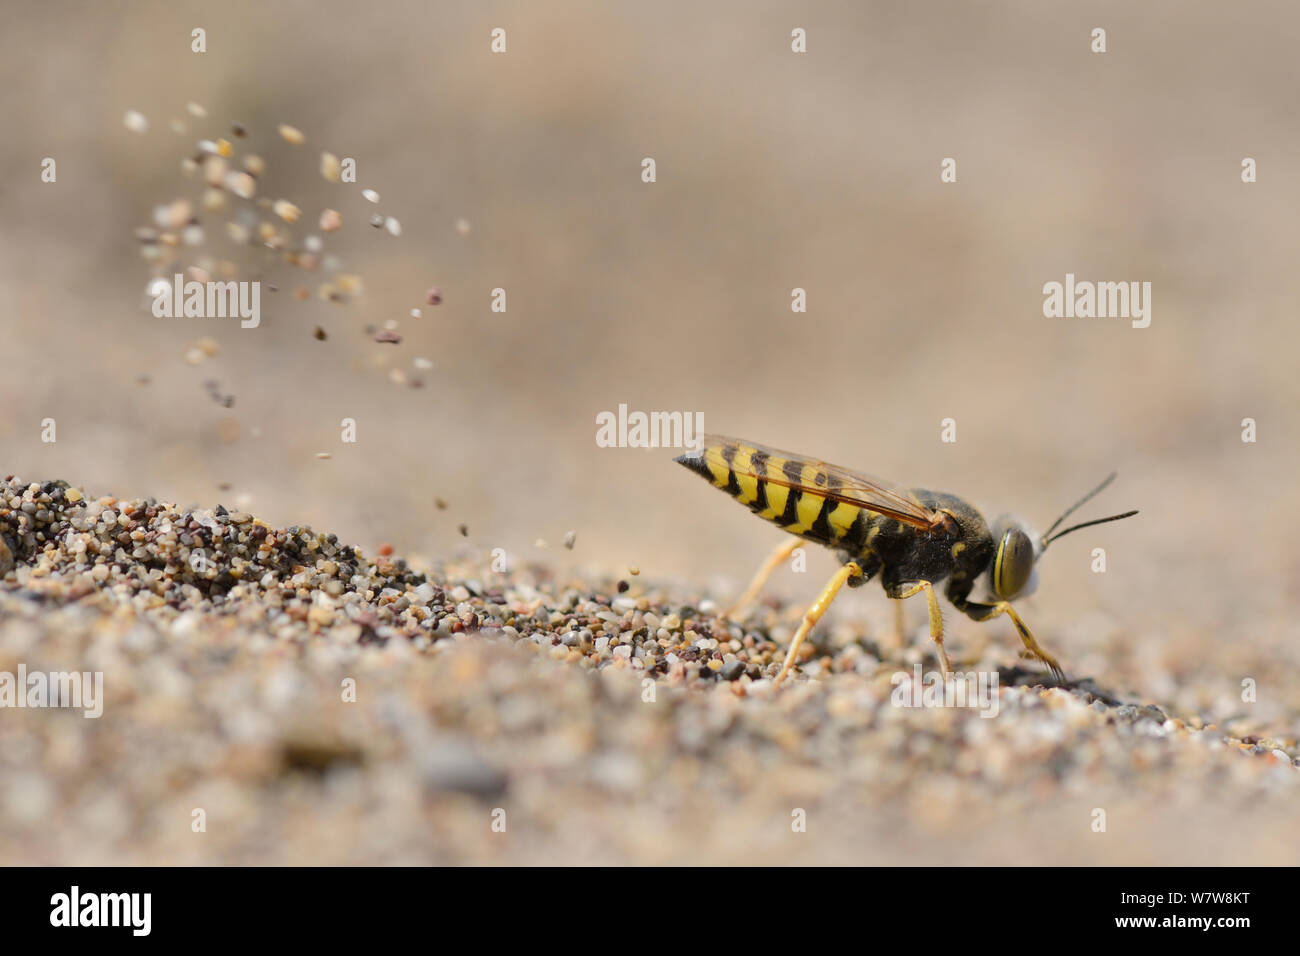 Female Sand wasp / Digger wasp (Bembix oculata) excavating a nest hole in beach sand, flinging sand behind it as it works, Crete, Greece, May. Stock Photo